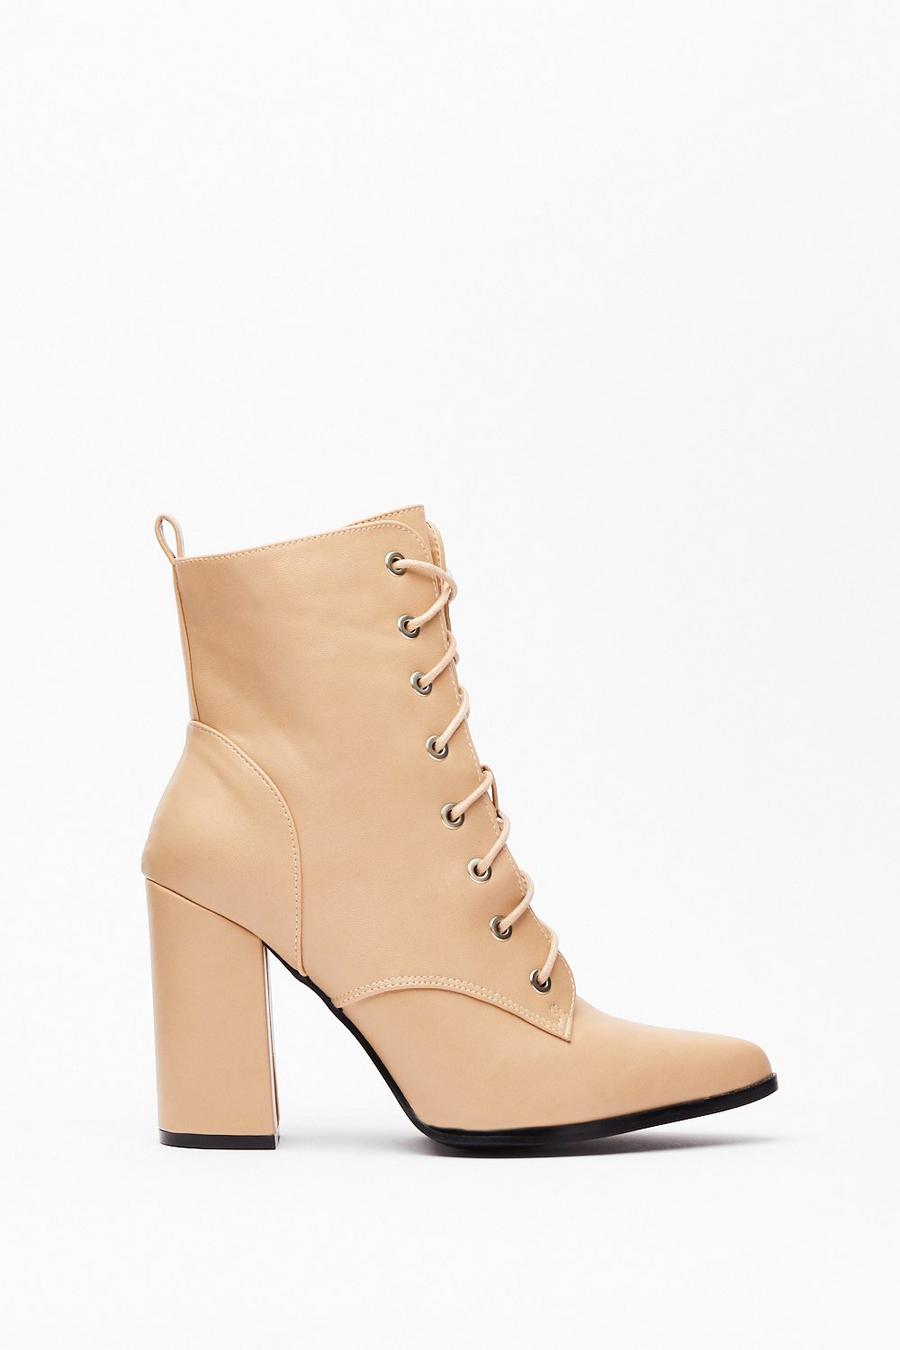 Boots, Leather Look Ruched Ankle Boots